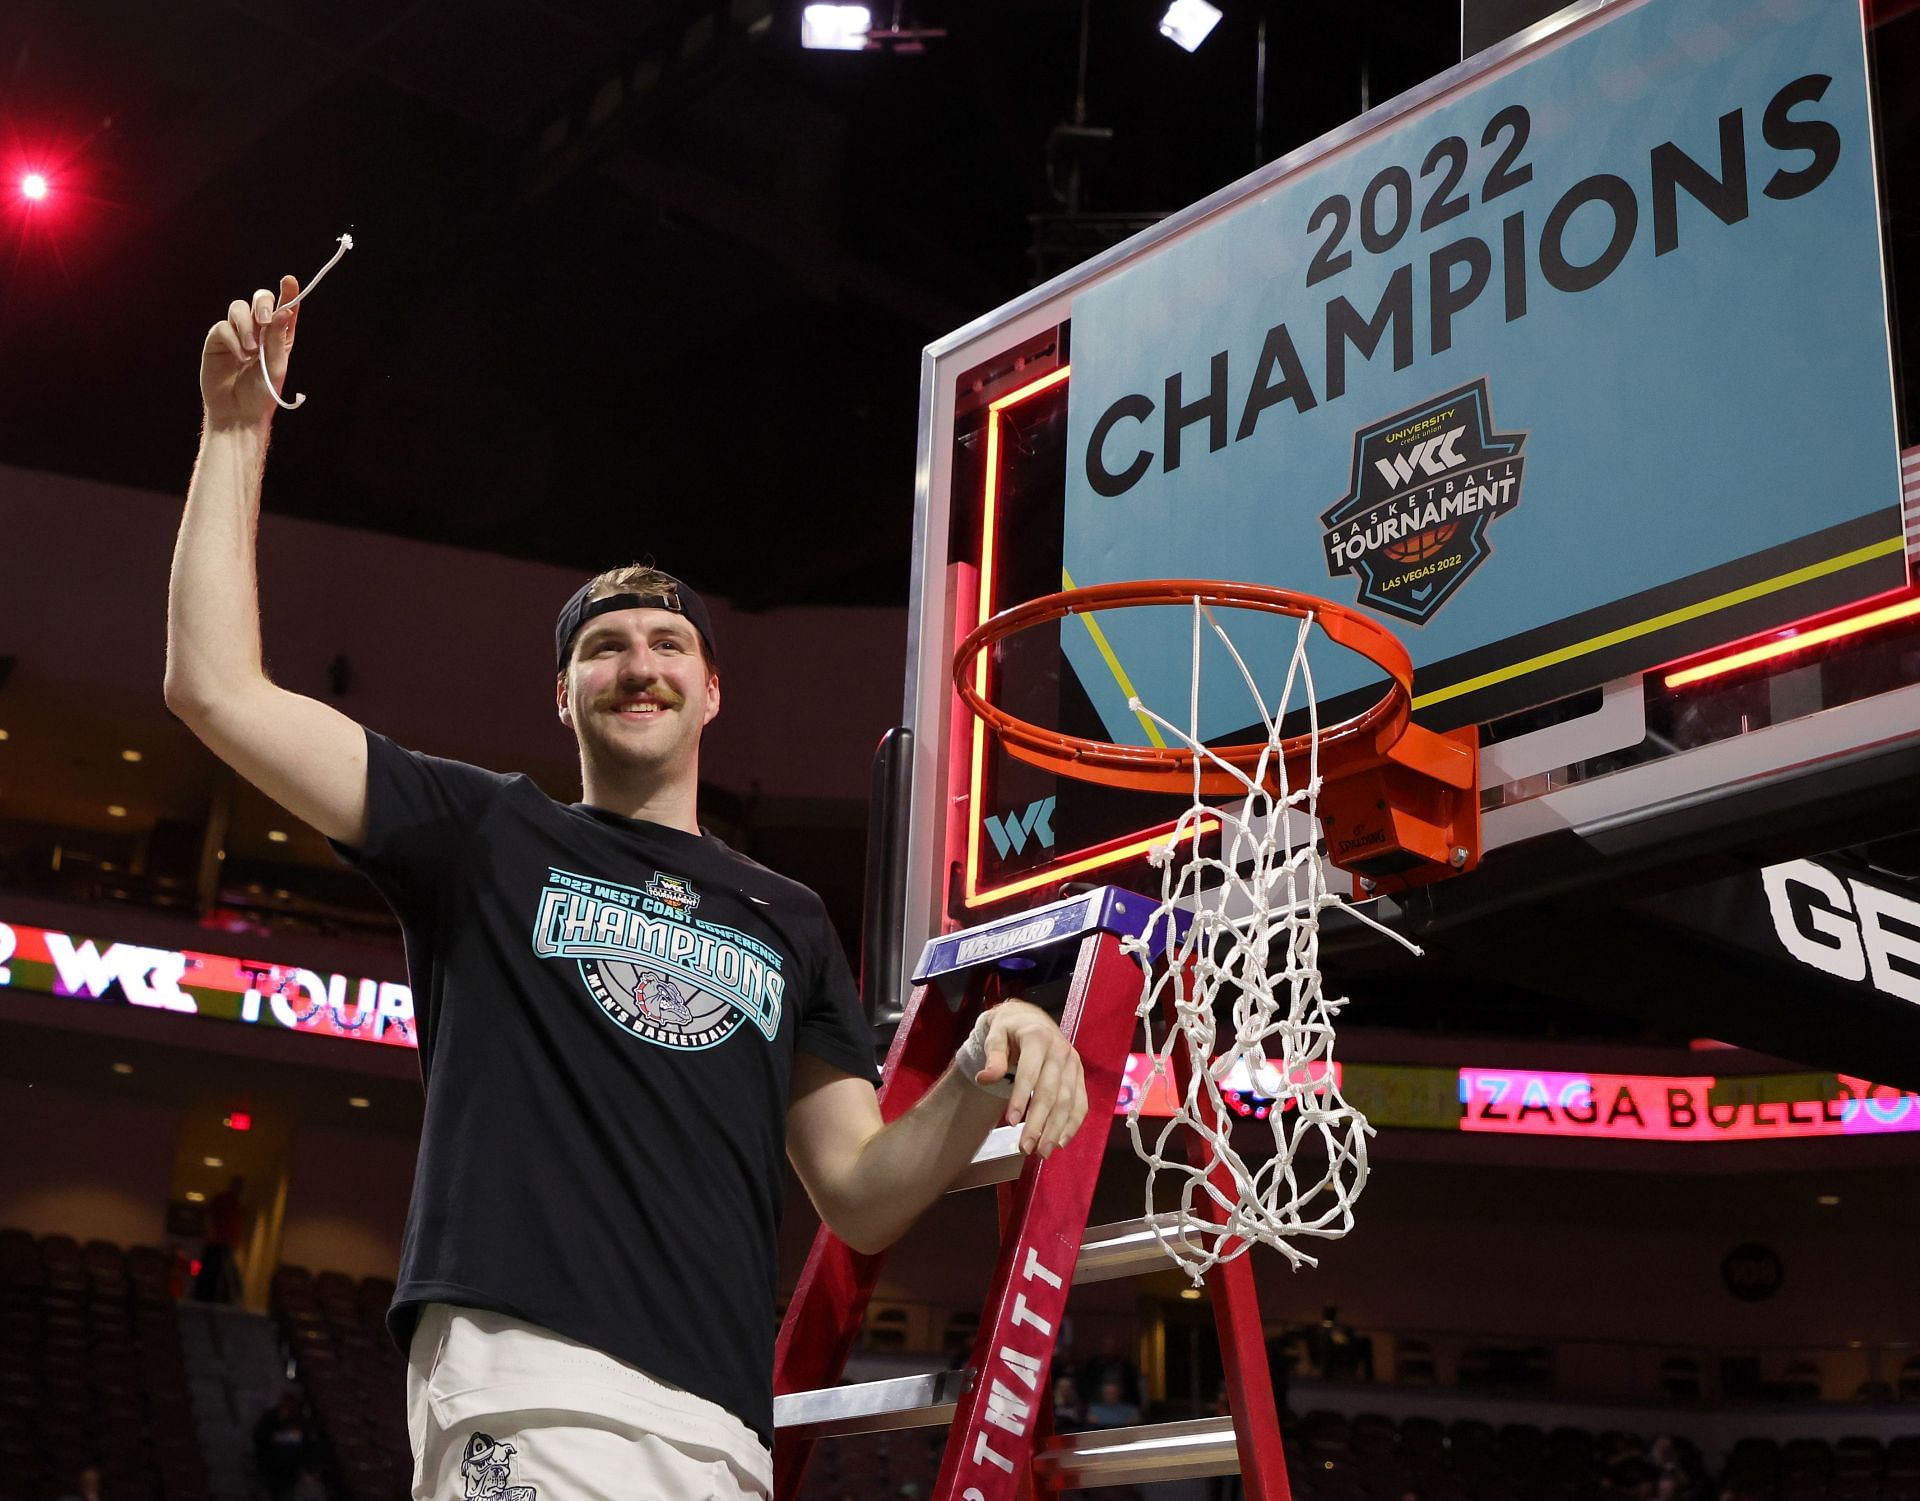 Gonzaga cut down the nets in the WCC Tournament, and now they aim to do it in the NCAA Tournament.